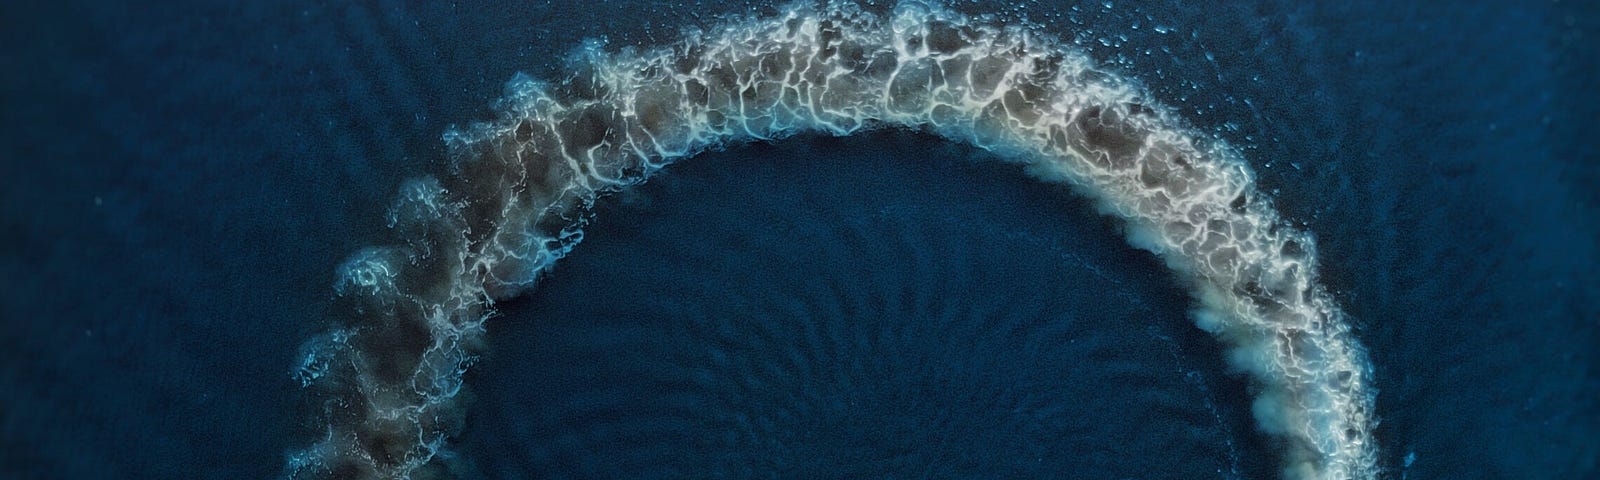 A photo of motor boat making circle on water surface.